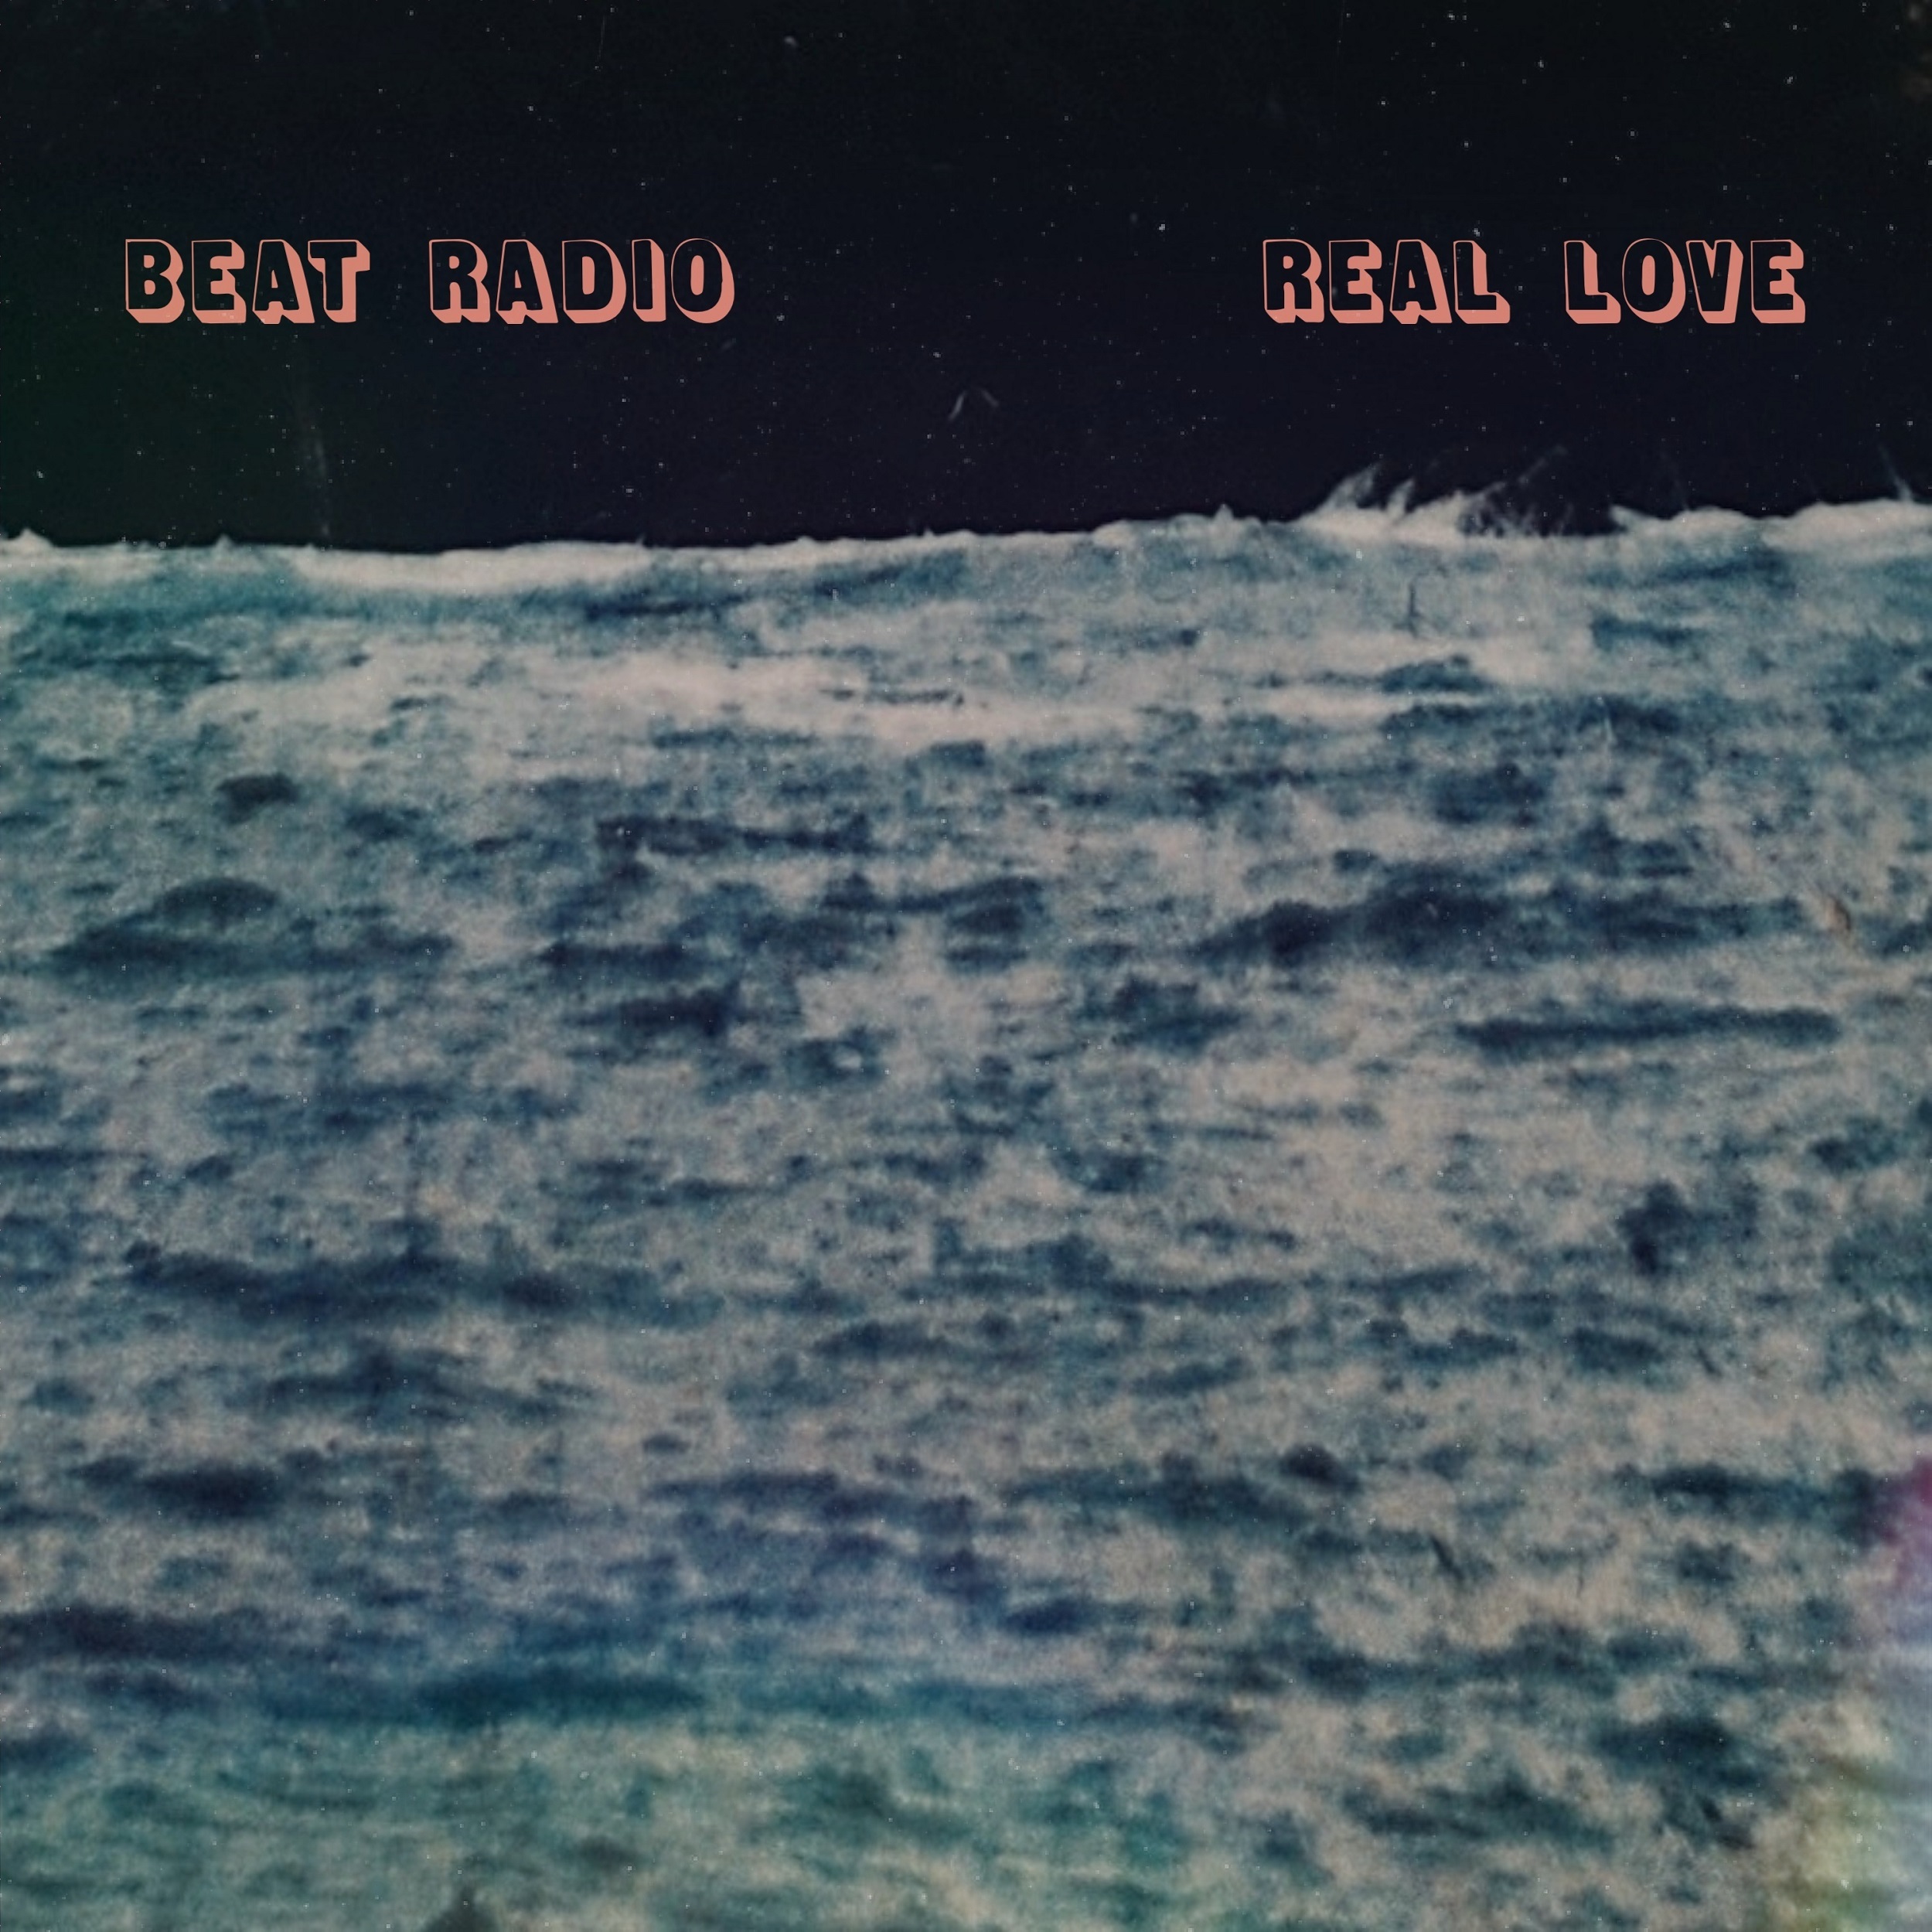 Artwork for Real Love by Beat Radio